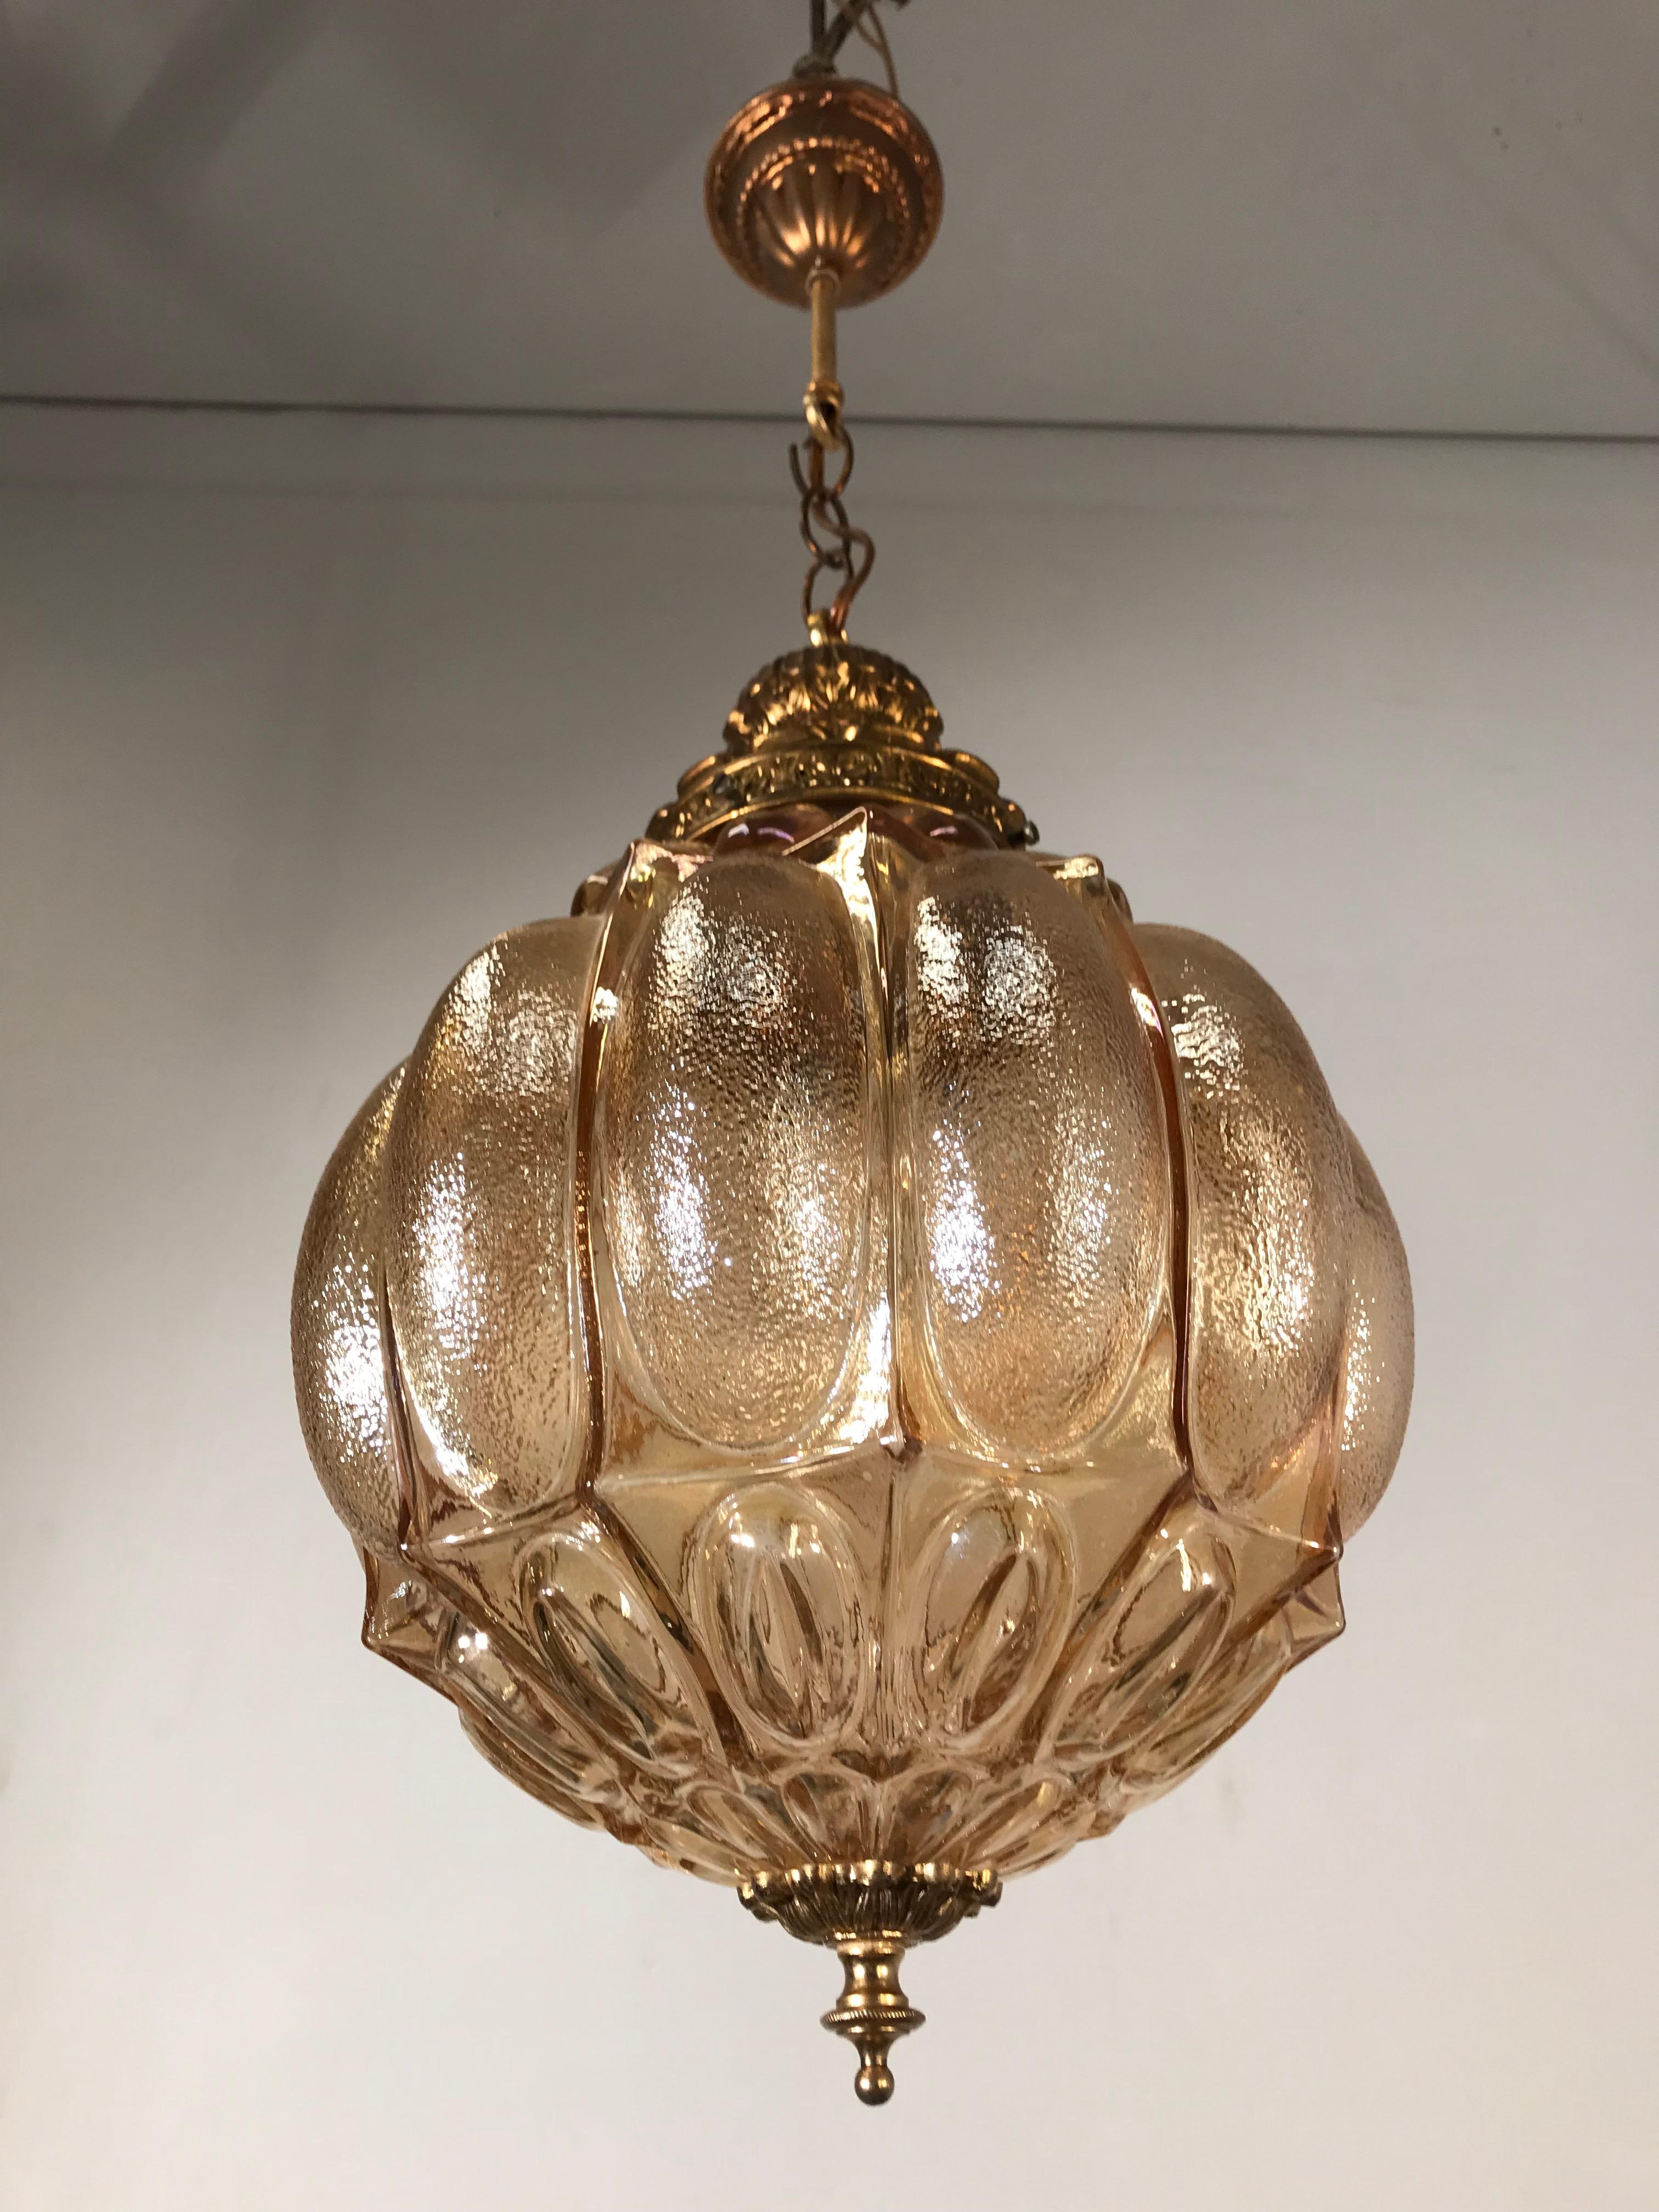 Rare MidCentury Modern Amber w Goldtone Glass and Brass Pendant / Light Fixture For Sale 4